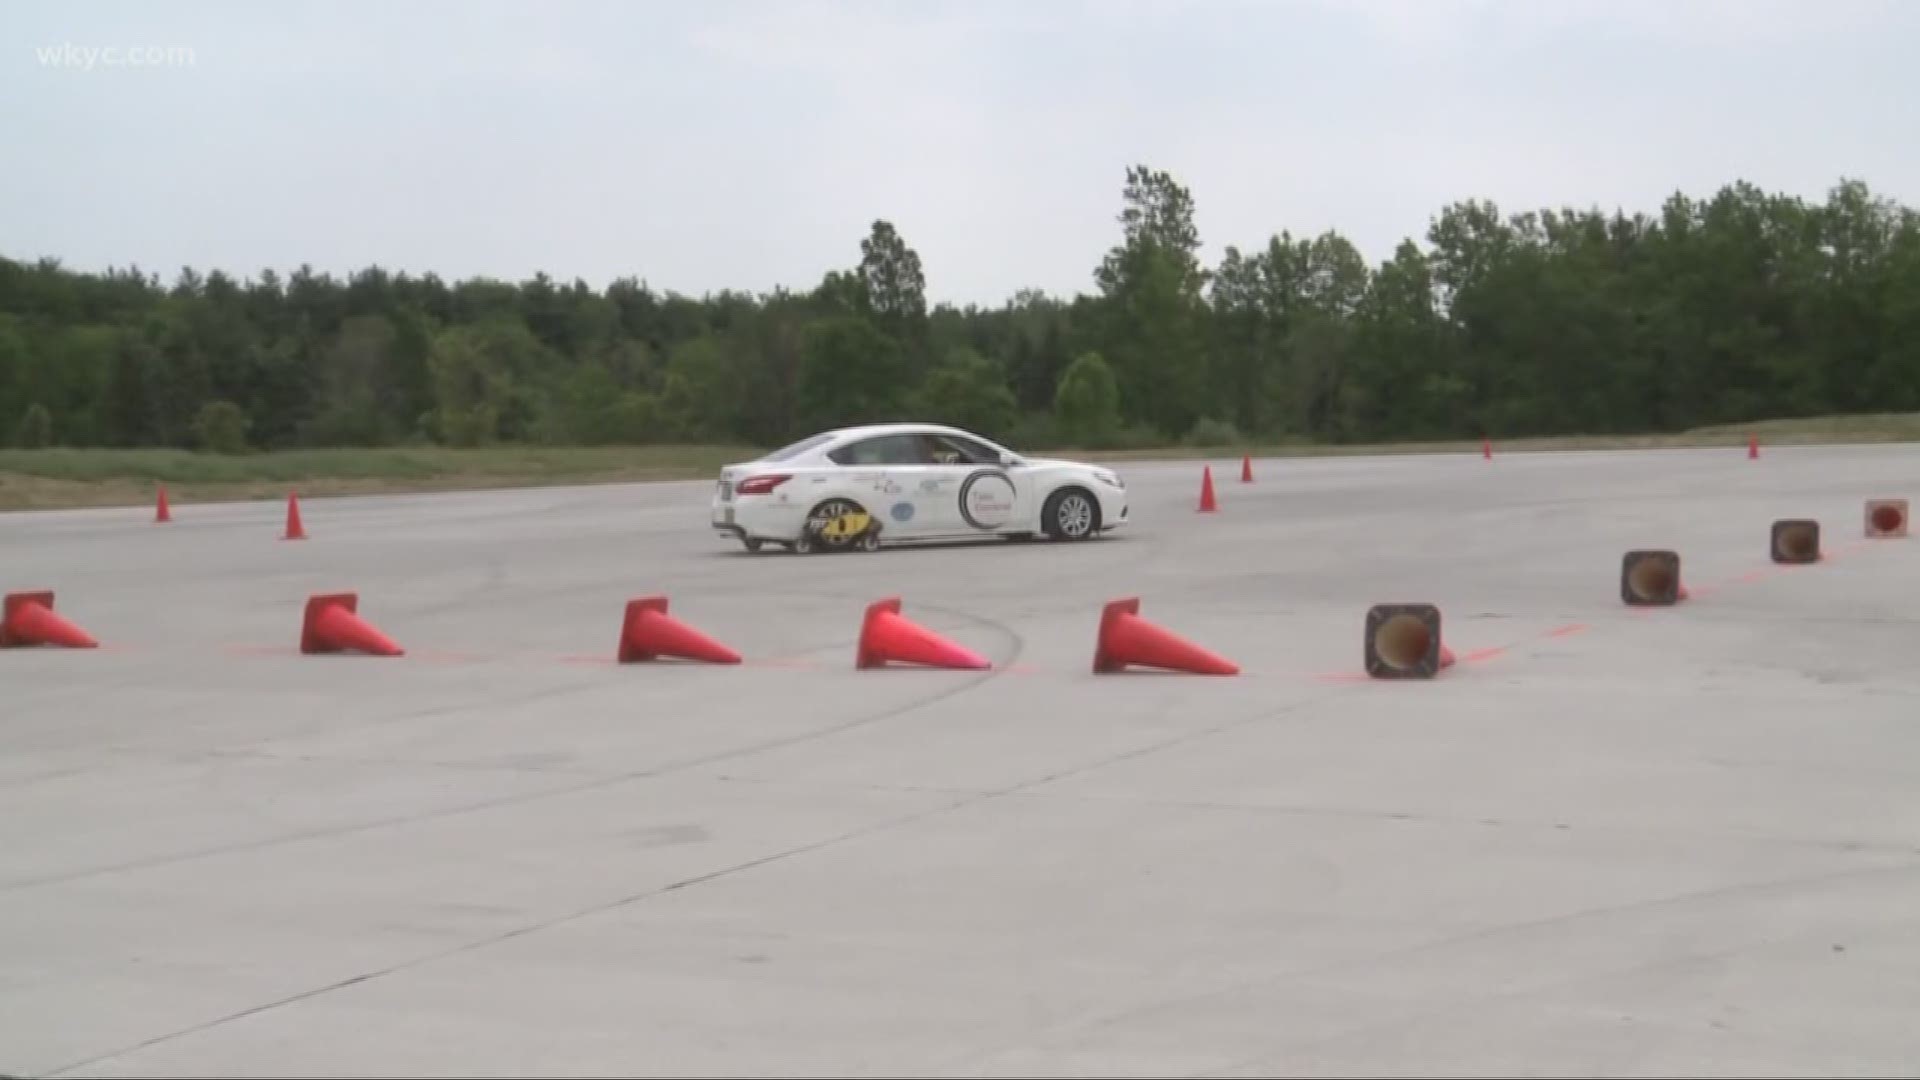 A 2.5 acre Driving Skills Pad behind the Medina County Career Center is the new home for the “Take Control Teen Driving" program. Amani Abraham reports.